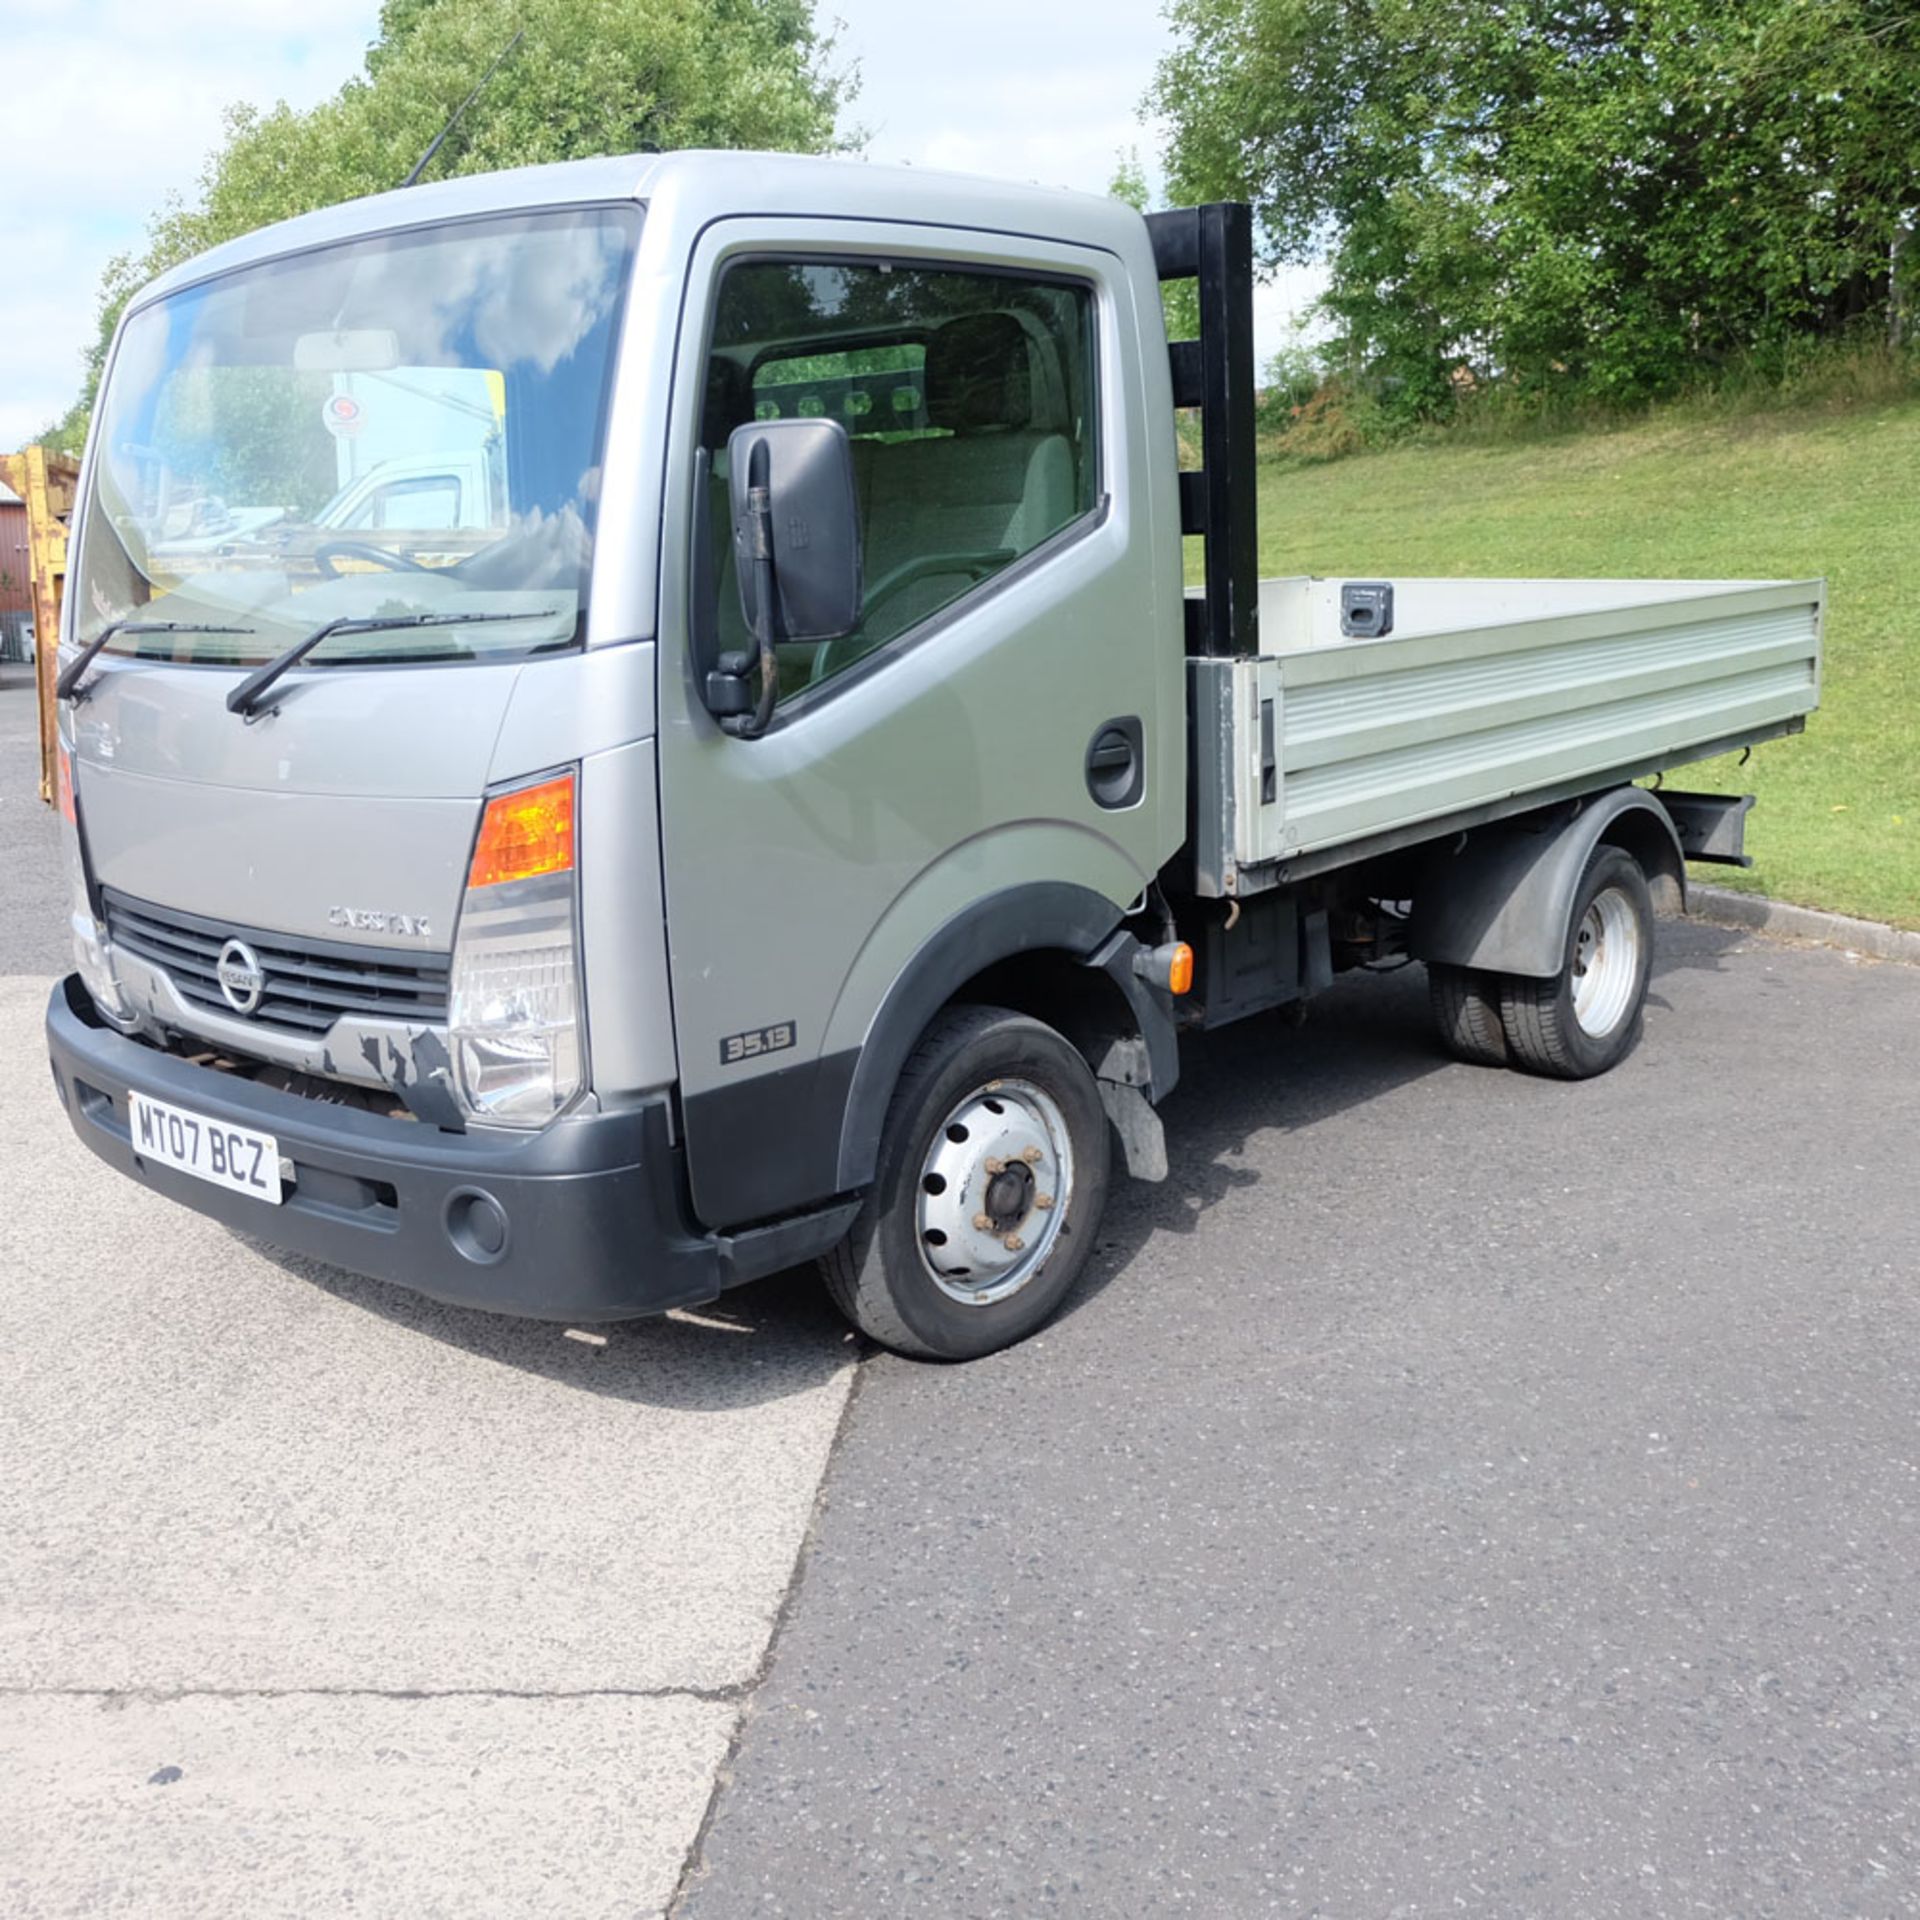 NISSAN CABSTAR 35.13. 2 Axle-Rigid Body Pickup Truck. 3500KG Gross Weight. Year 2007. - Image 2 of 16